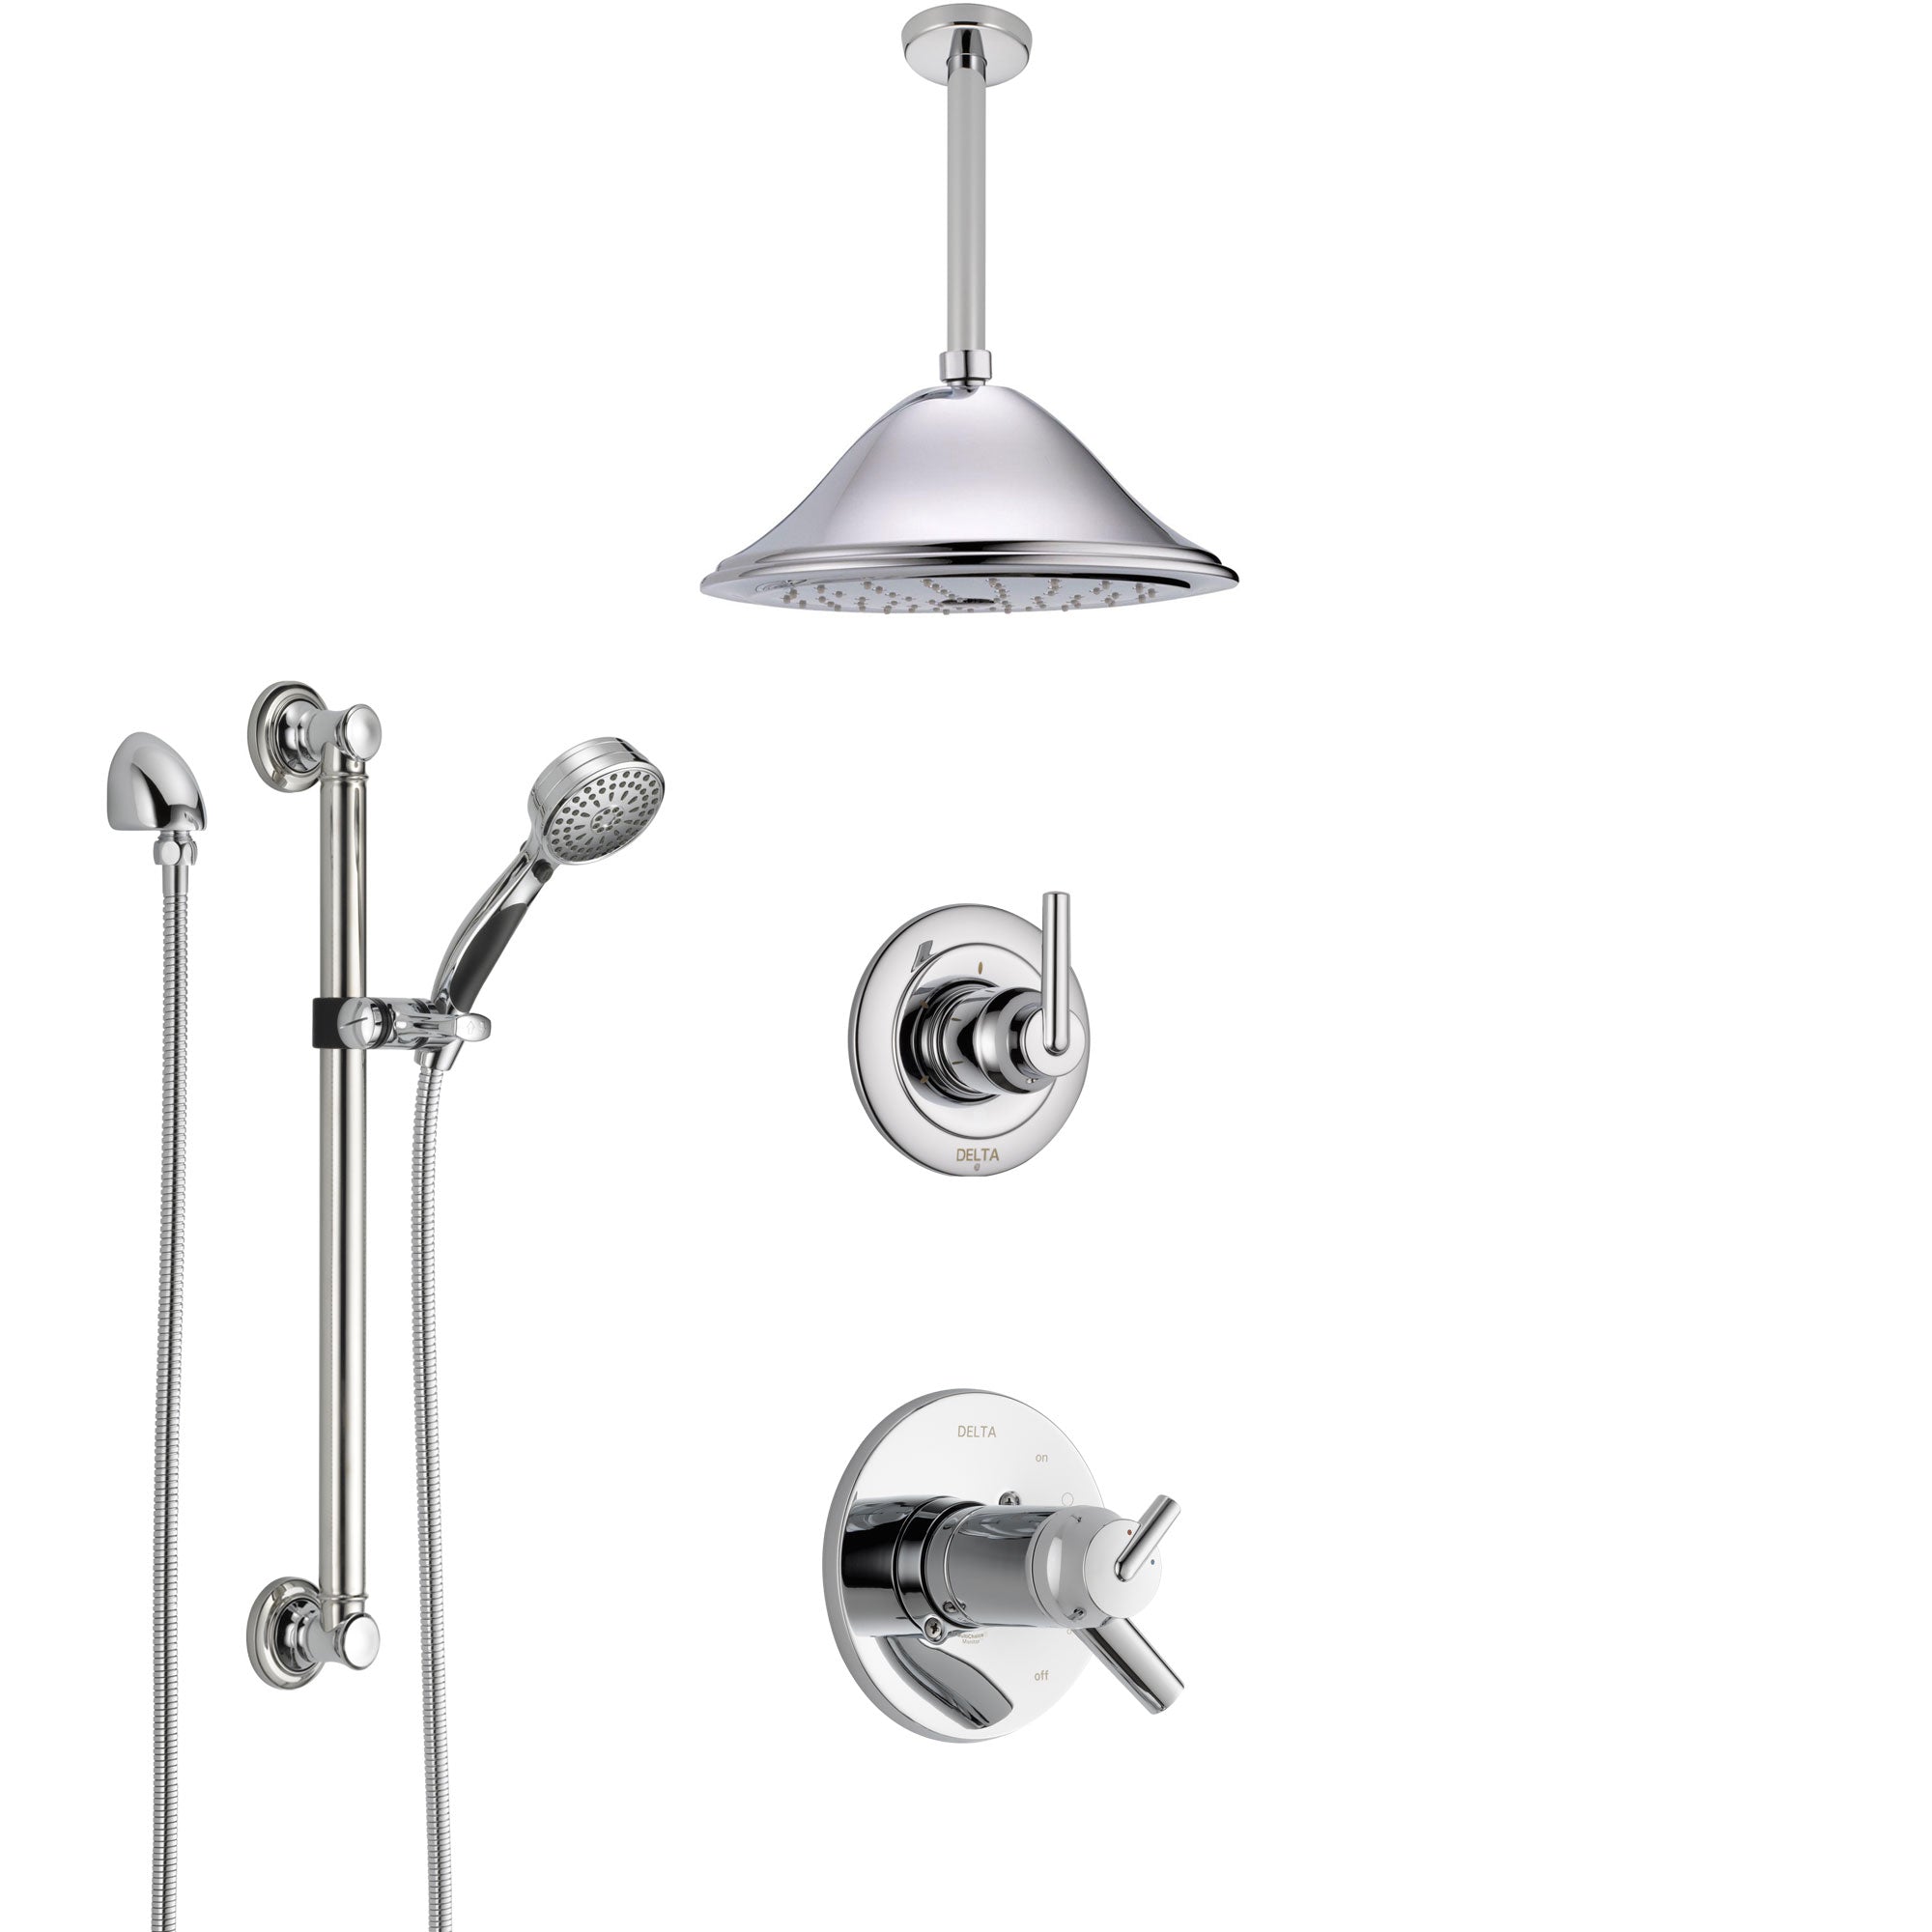 Delta Trinsic Chrome Shower System with Dual Thermostatic Control Handle, Diverter, Ceiling Mount Showerhead, and Hand Shower with Grab Bar SS17T5924